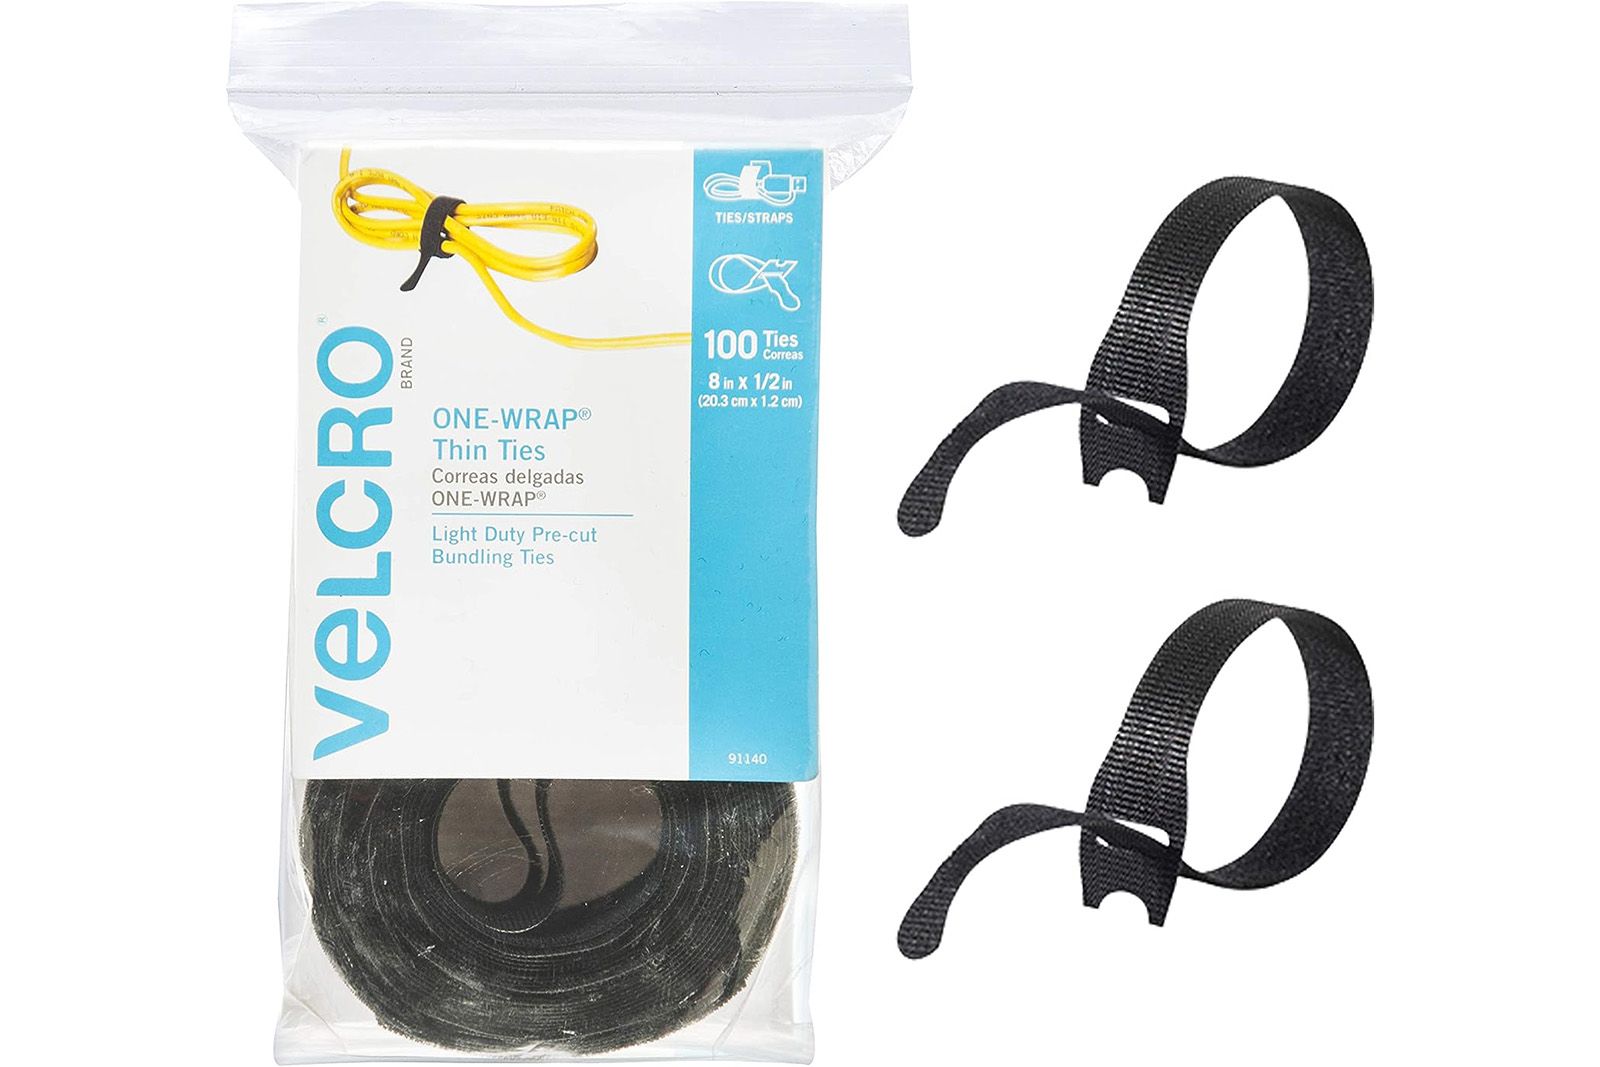 VELCRO Brand One-Wrap Cable Ties